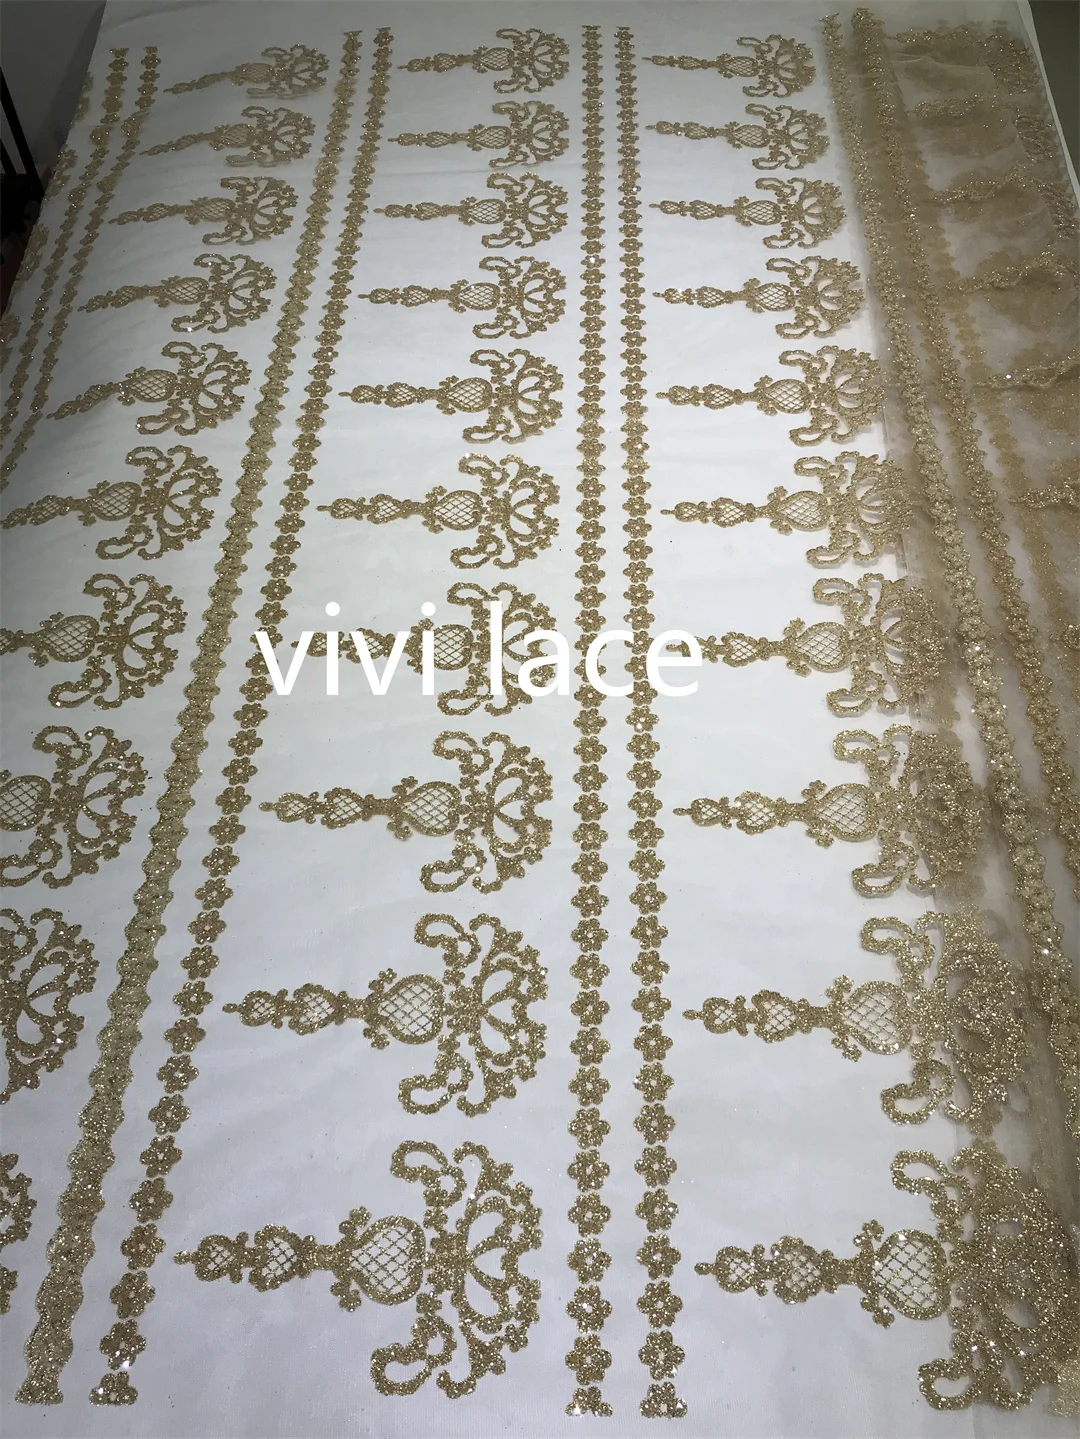 

5 Yards New Bridal Wedding Shining Golden Glitter Glued Tulle Lace Fabric For Sawing Party Dress/Occasion